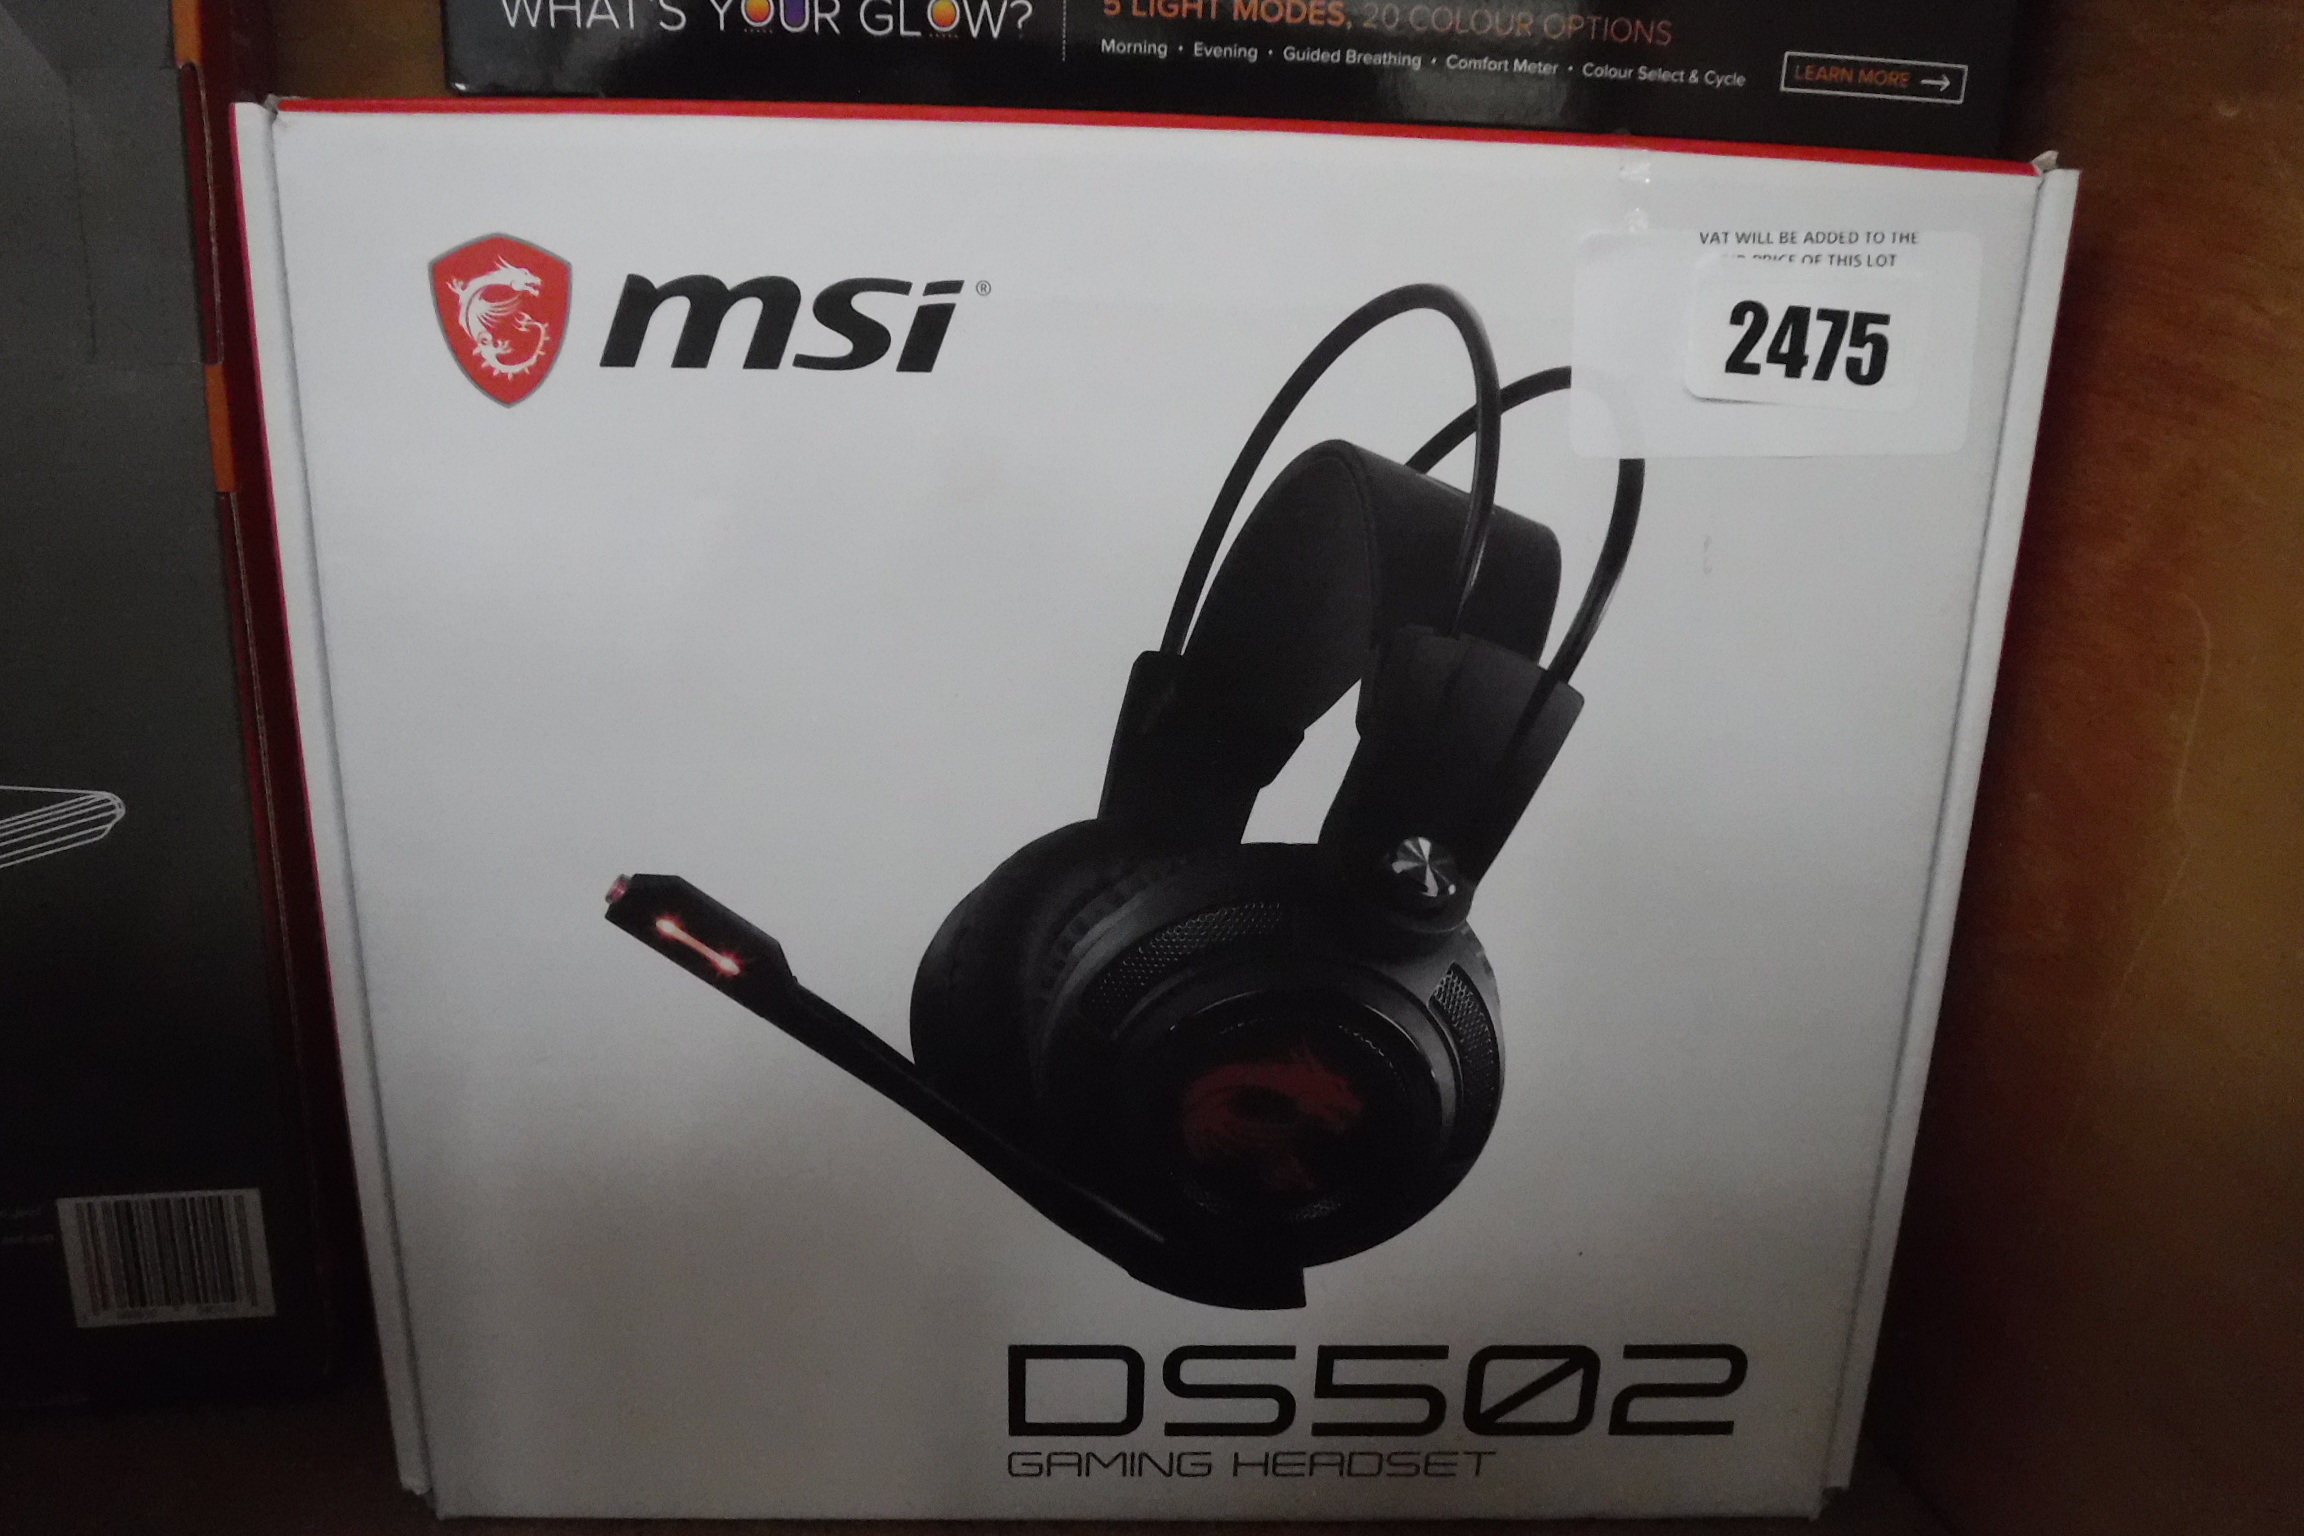 Cased set of MSI DS502 gaming headset